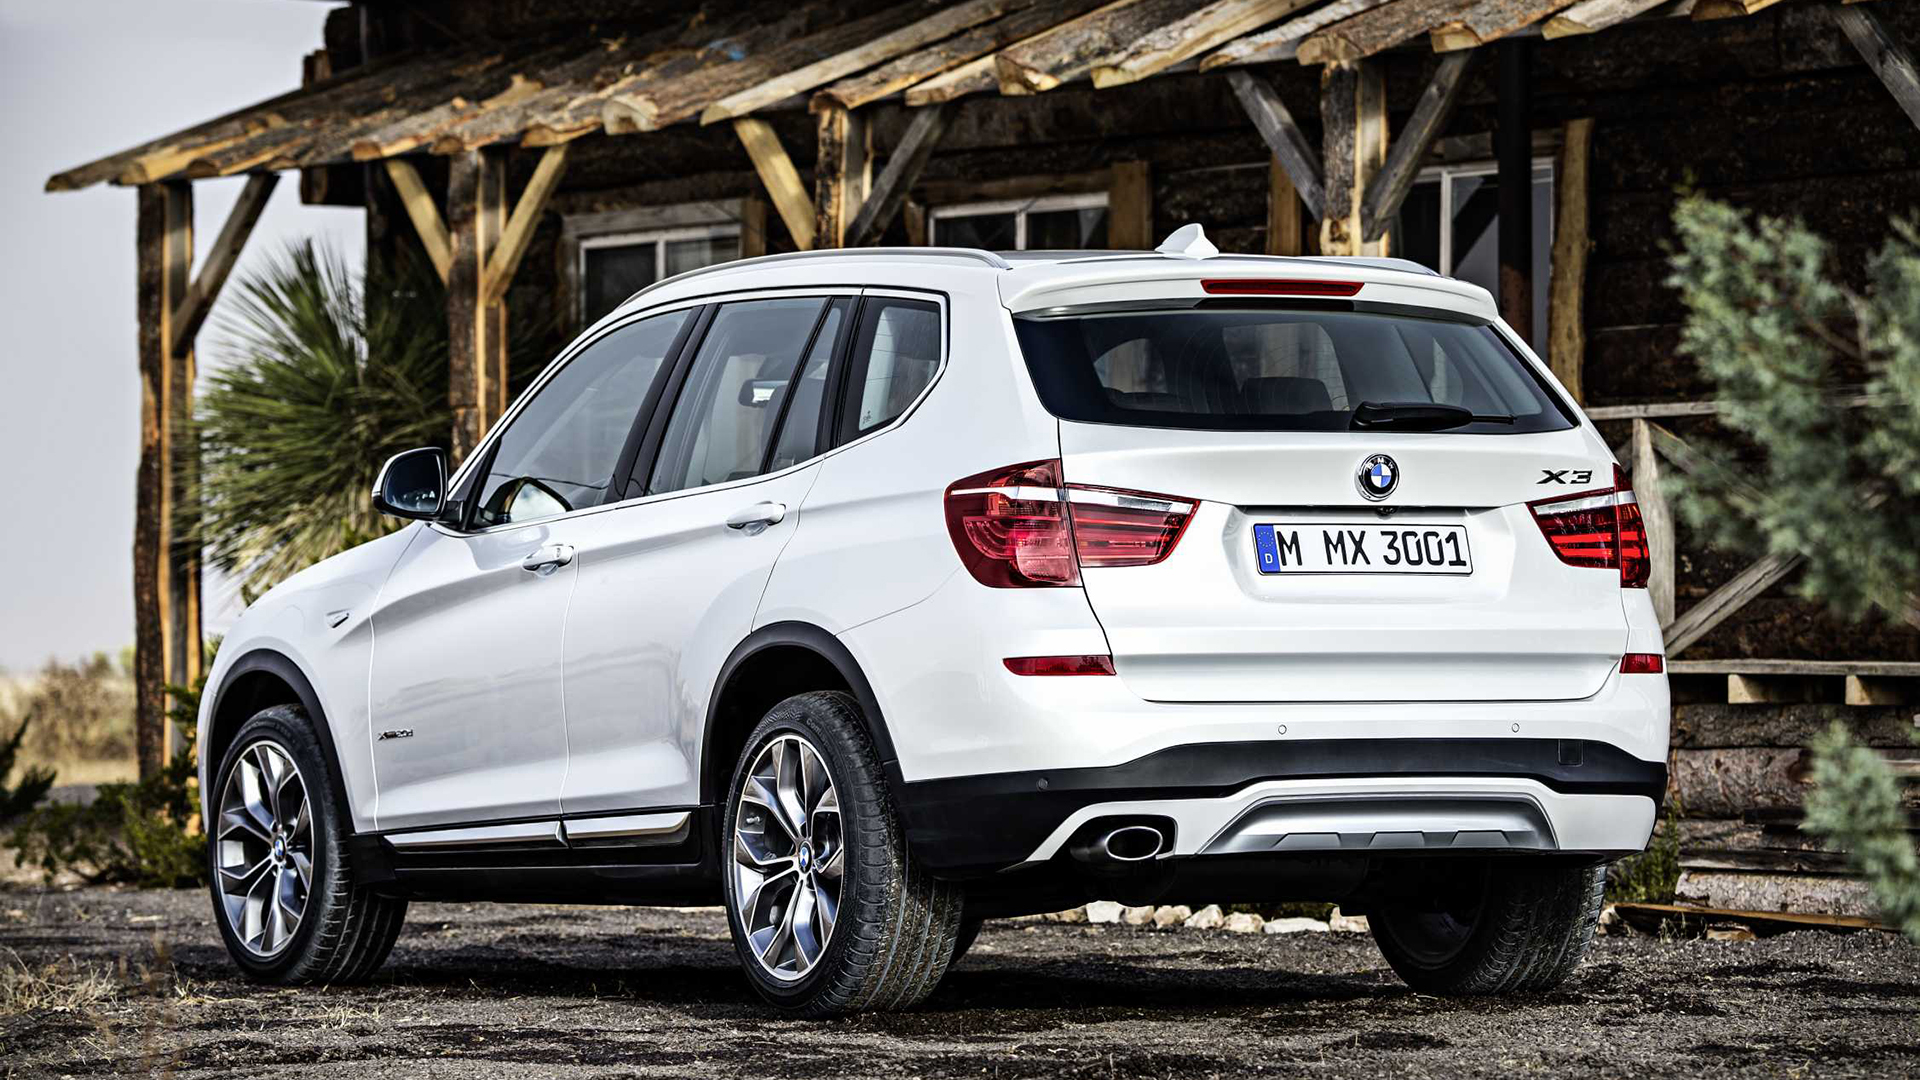 BMW x3 2014 xDrive 20d Expedition Compare